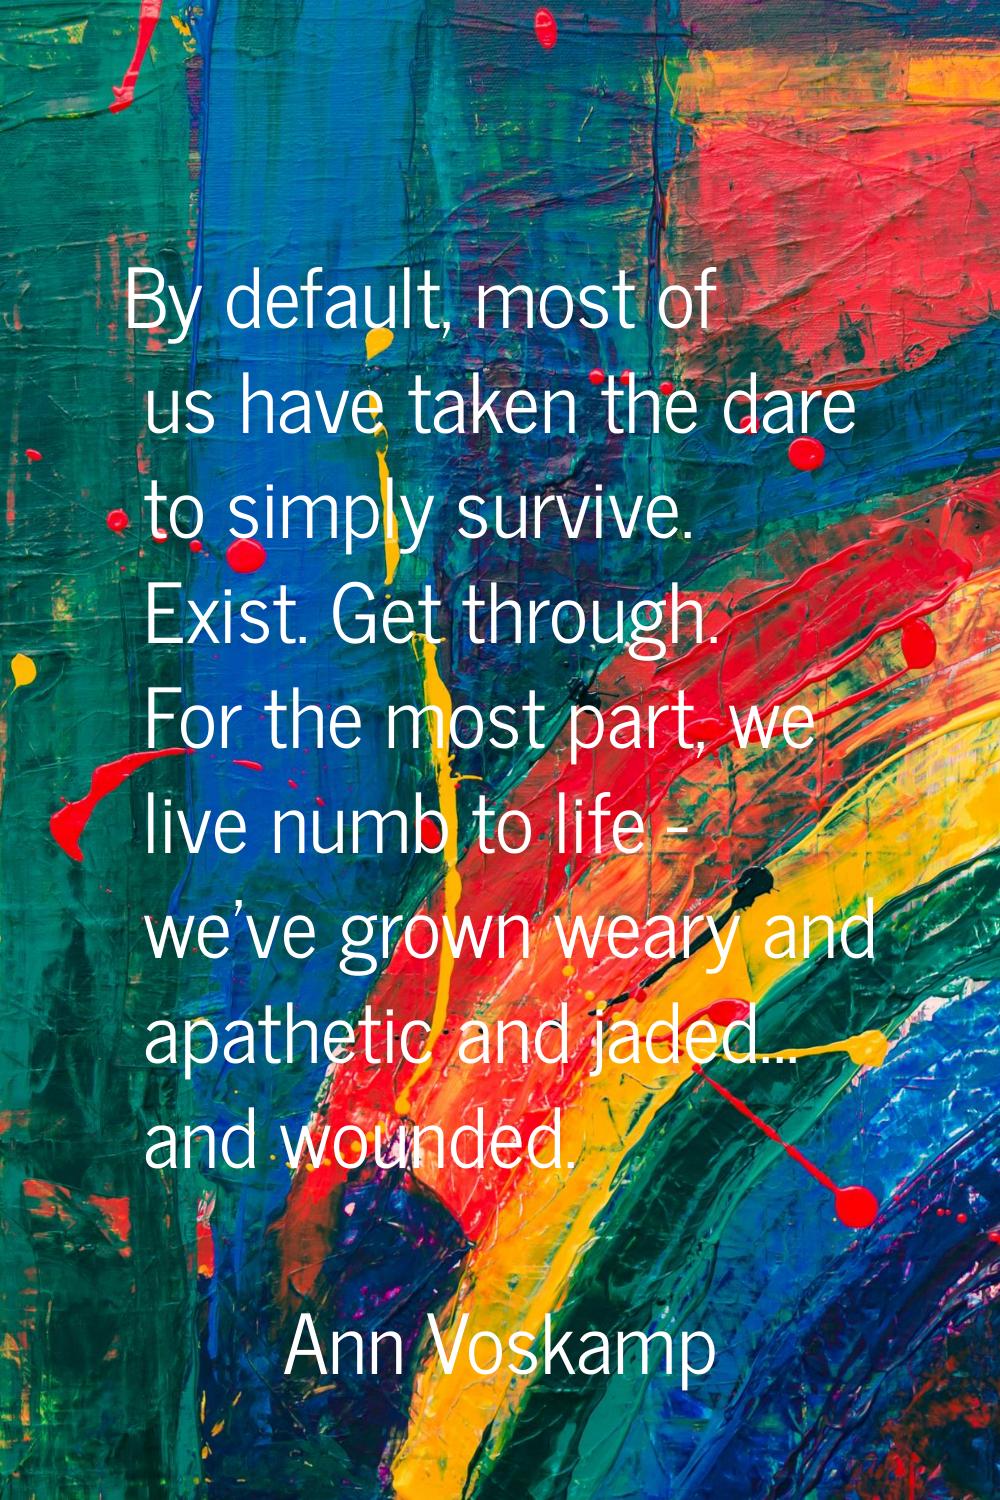 By default, most of us have taken the dare to simply survive. Exist. Get through. For the most part